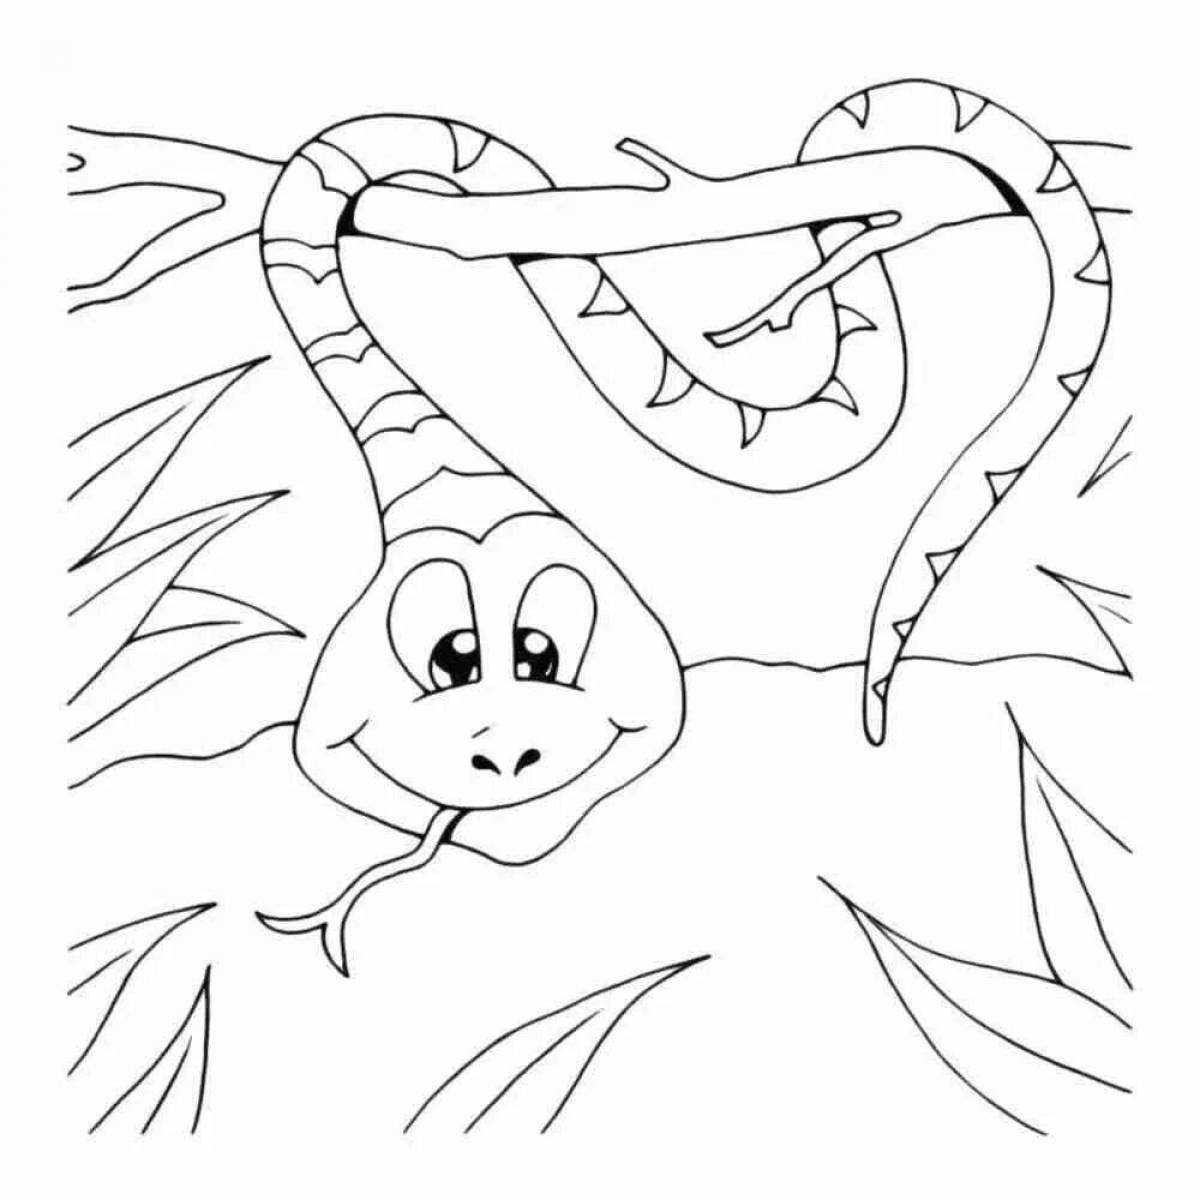 Creative snake coloring book for 3-4 year olds